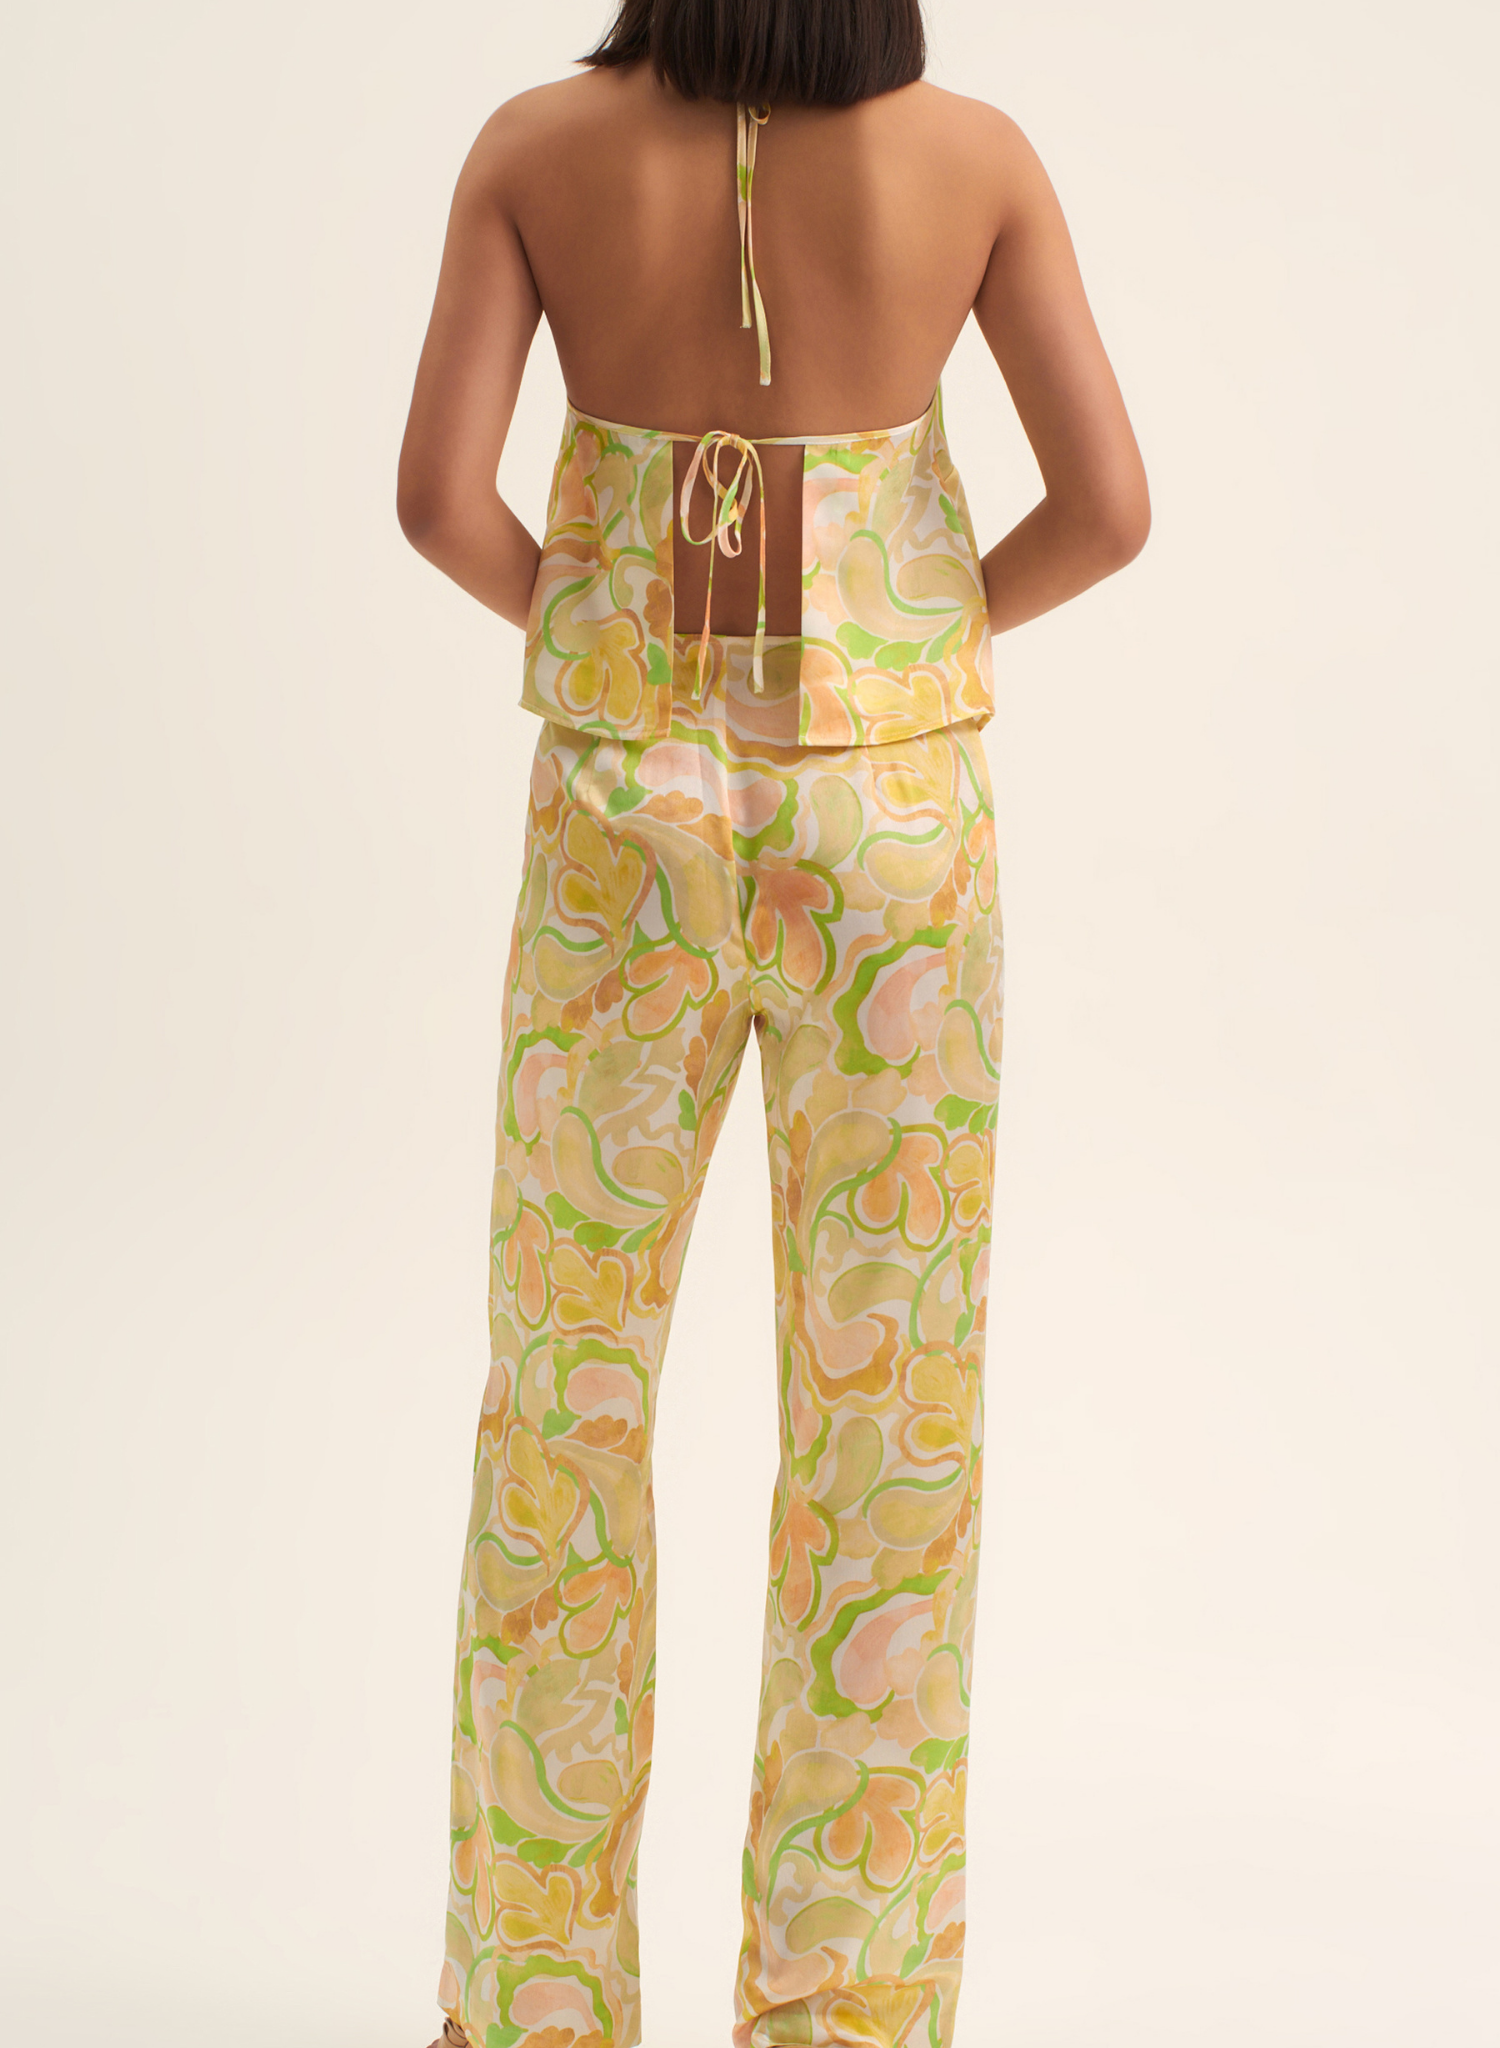 The Cassia Pant is a classic cut straight leg pant. The statement print makes this the perfect piece to pair back with all your closet staples or go for a matching look with the Della Halter